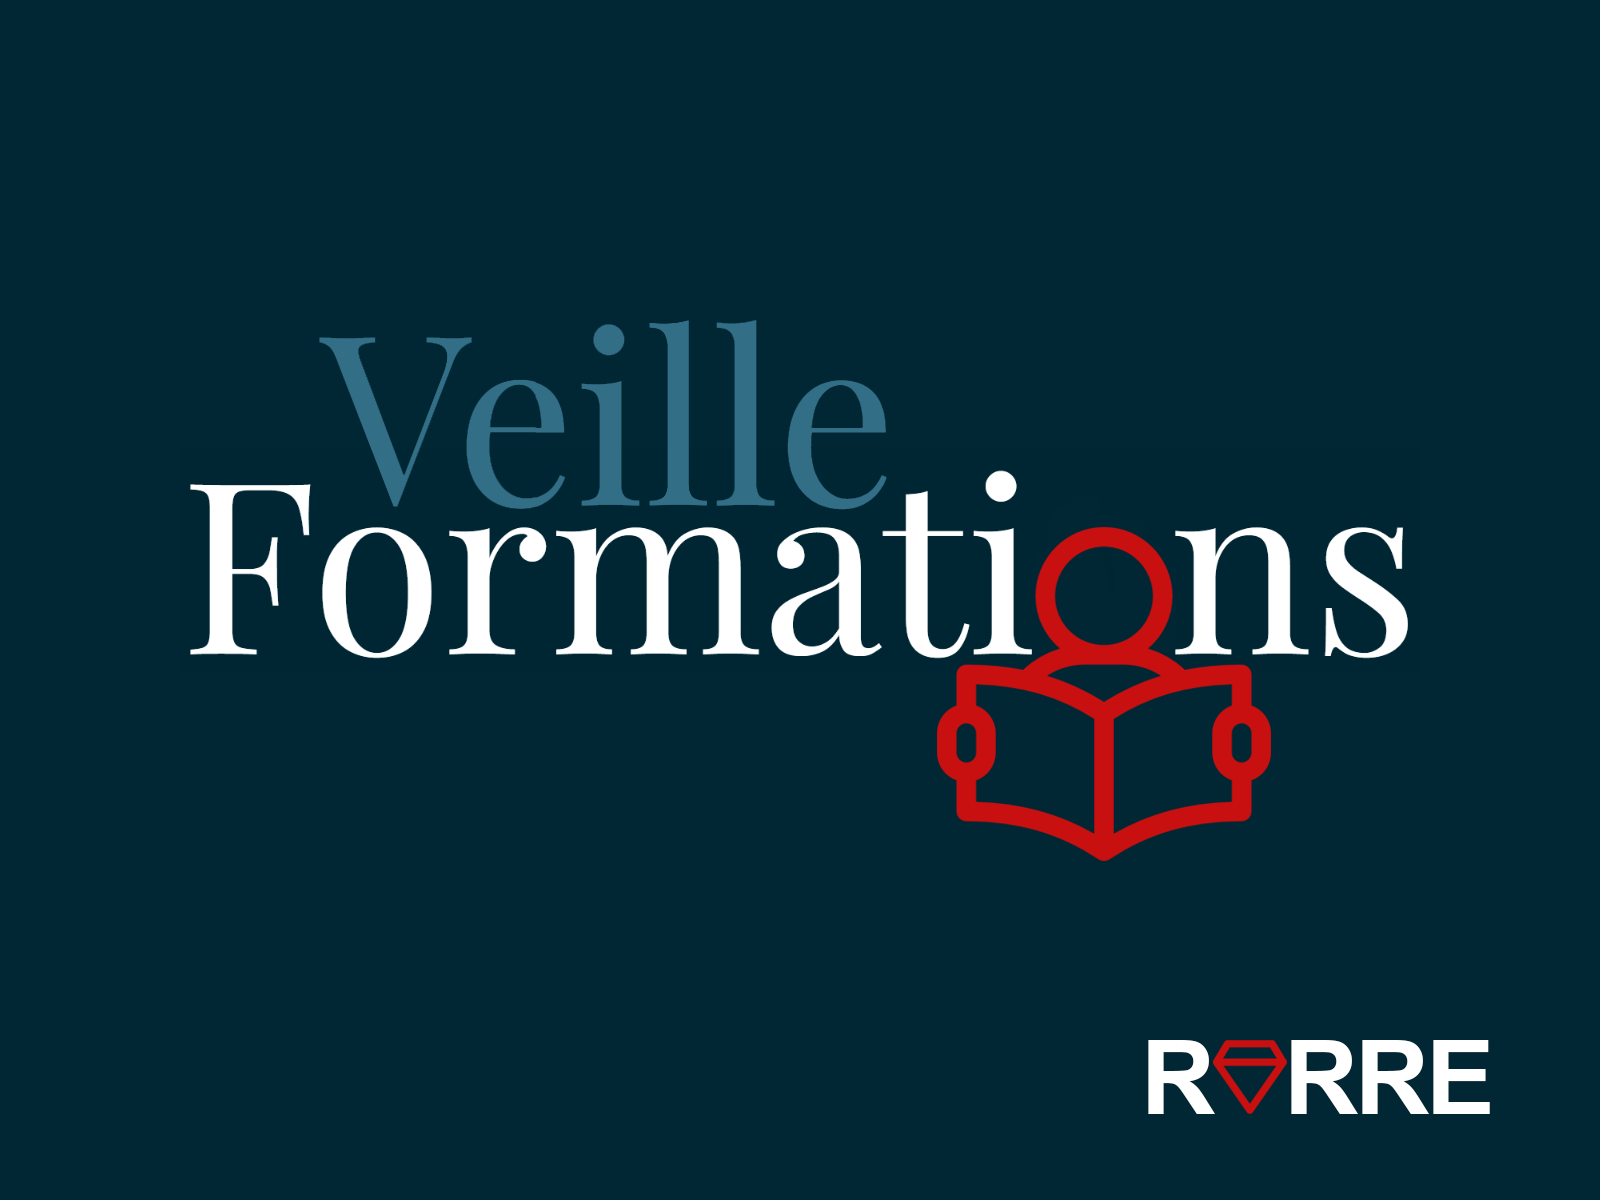 RARRE Veille Formations